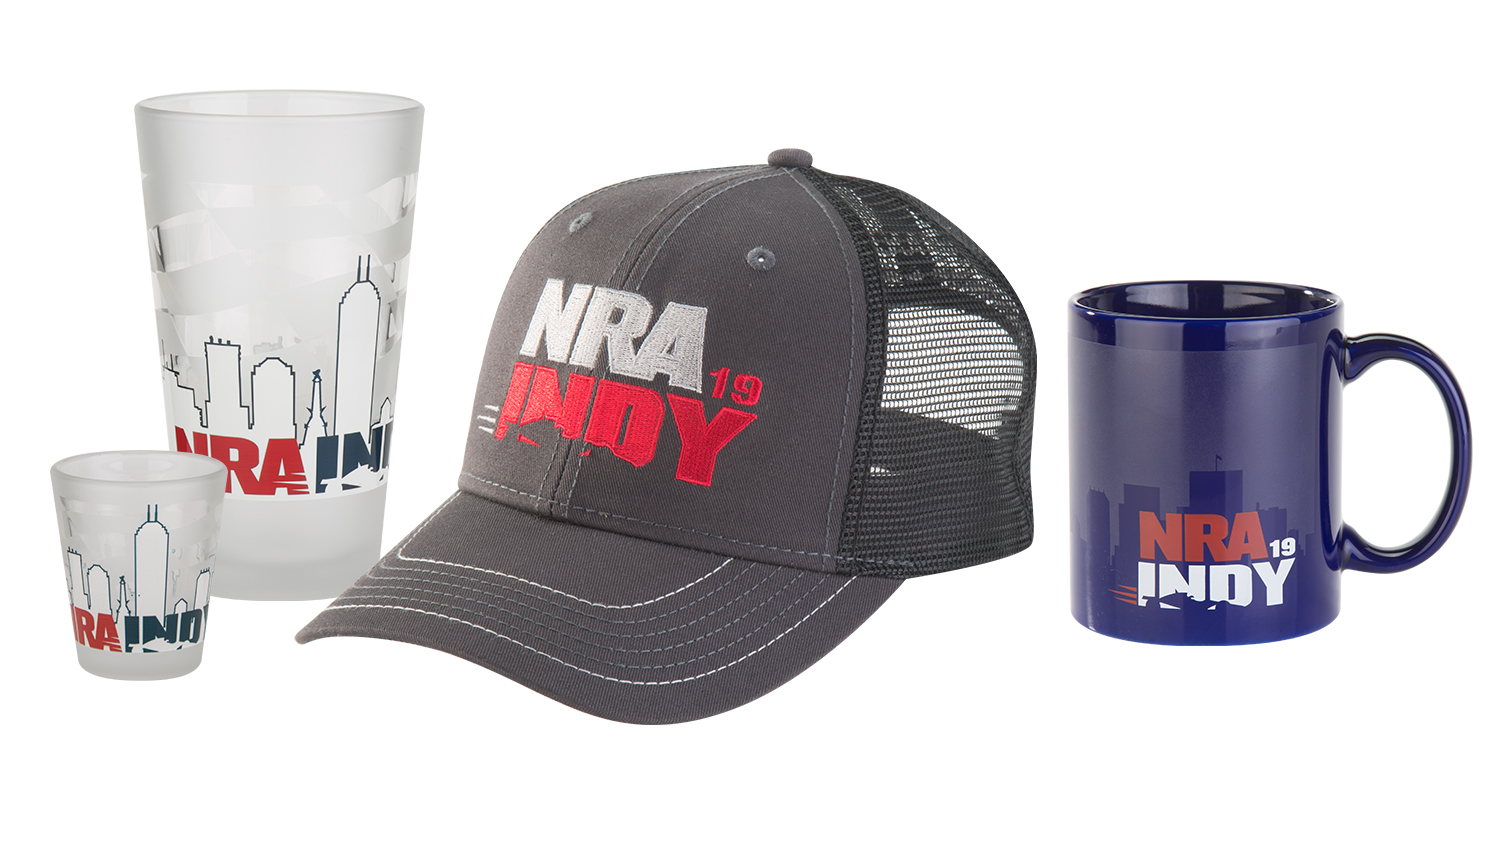 Get Your Exclusive 2019 NRA Annual Meetings Gear from the NRAstore